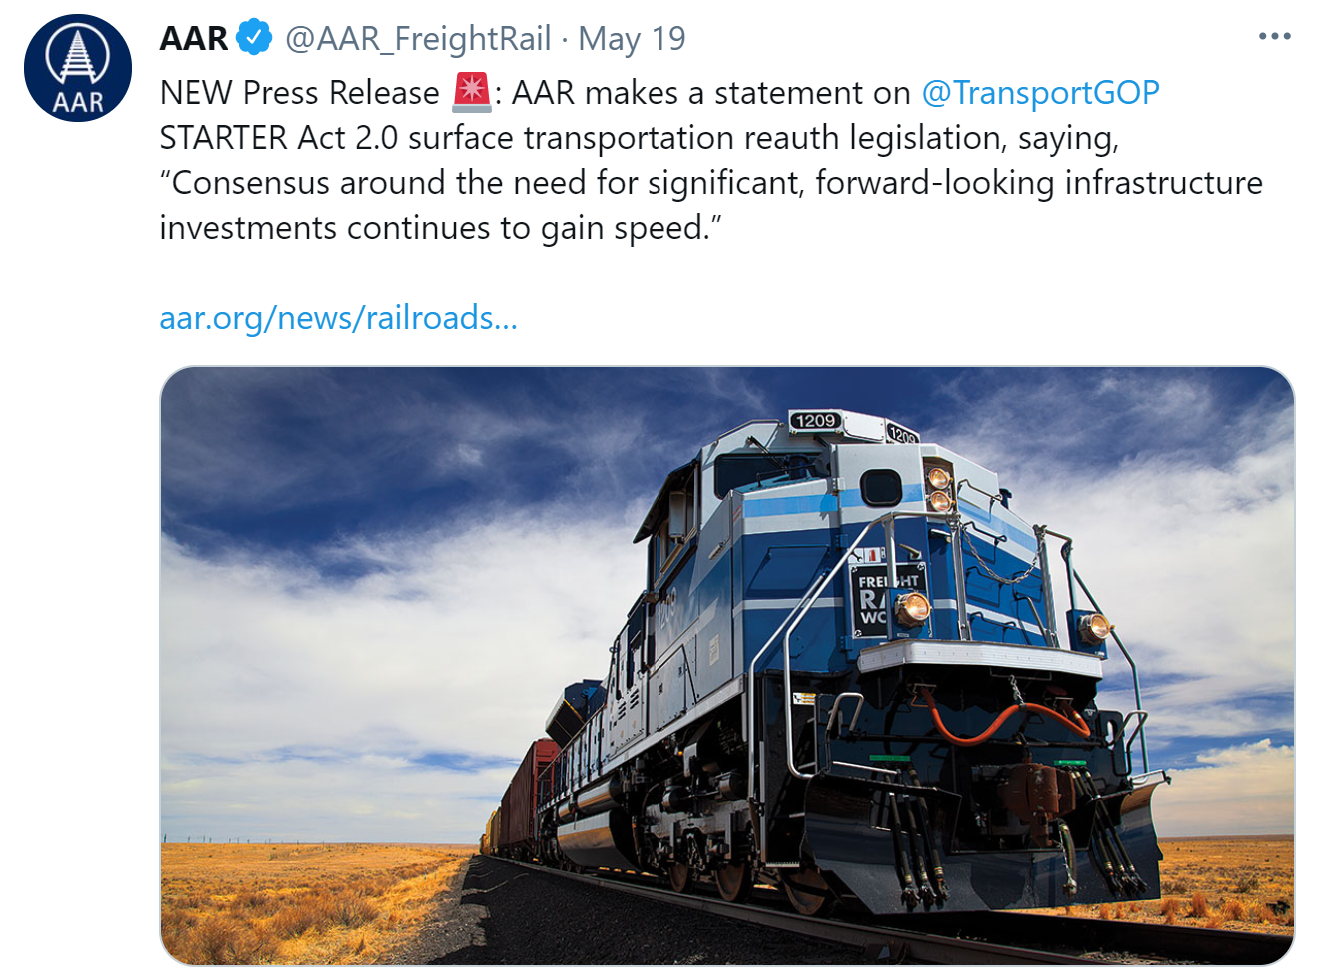 AAR Supports STARTER Act 2.0